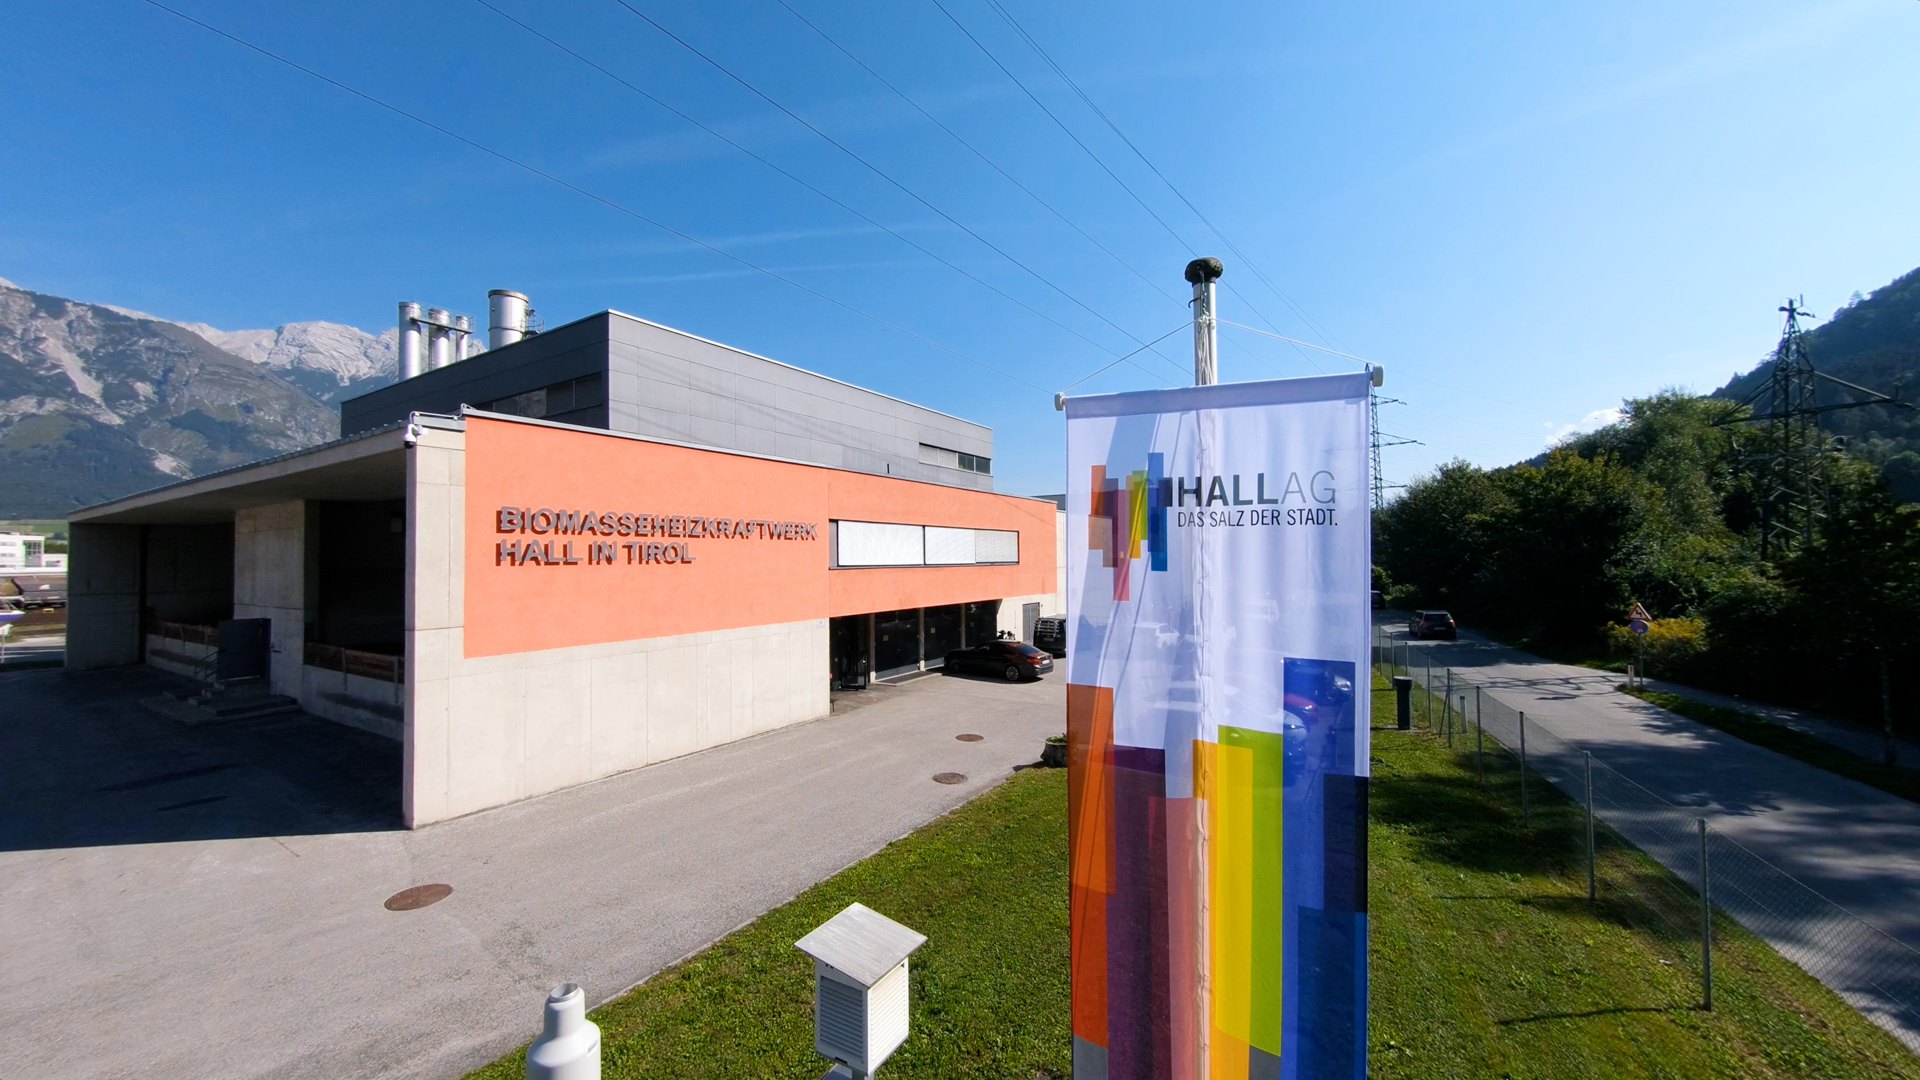 PARAT Halvorsen to deliver first Power to Heat system at HALL AG in Austria